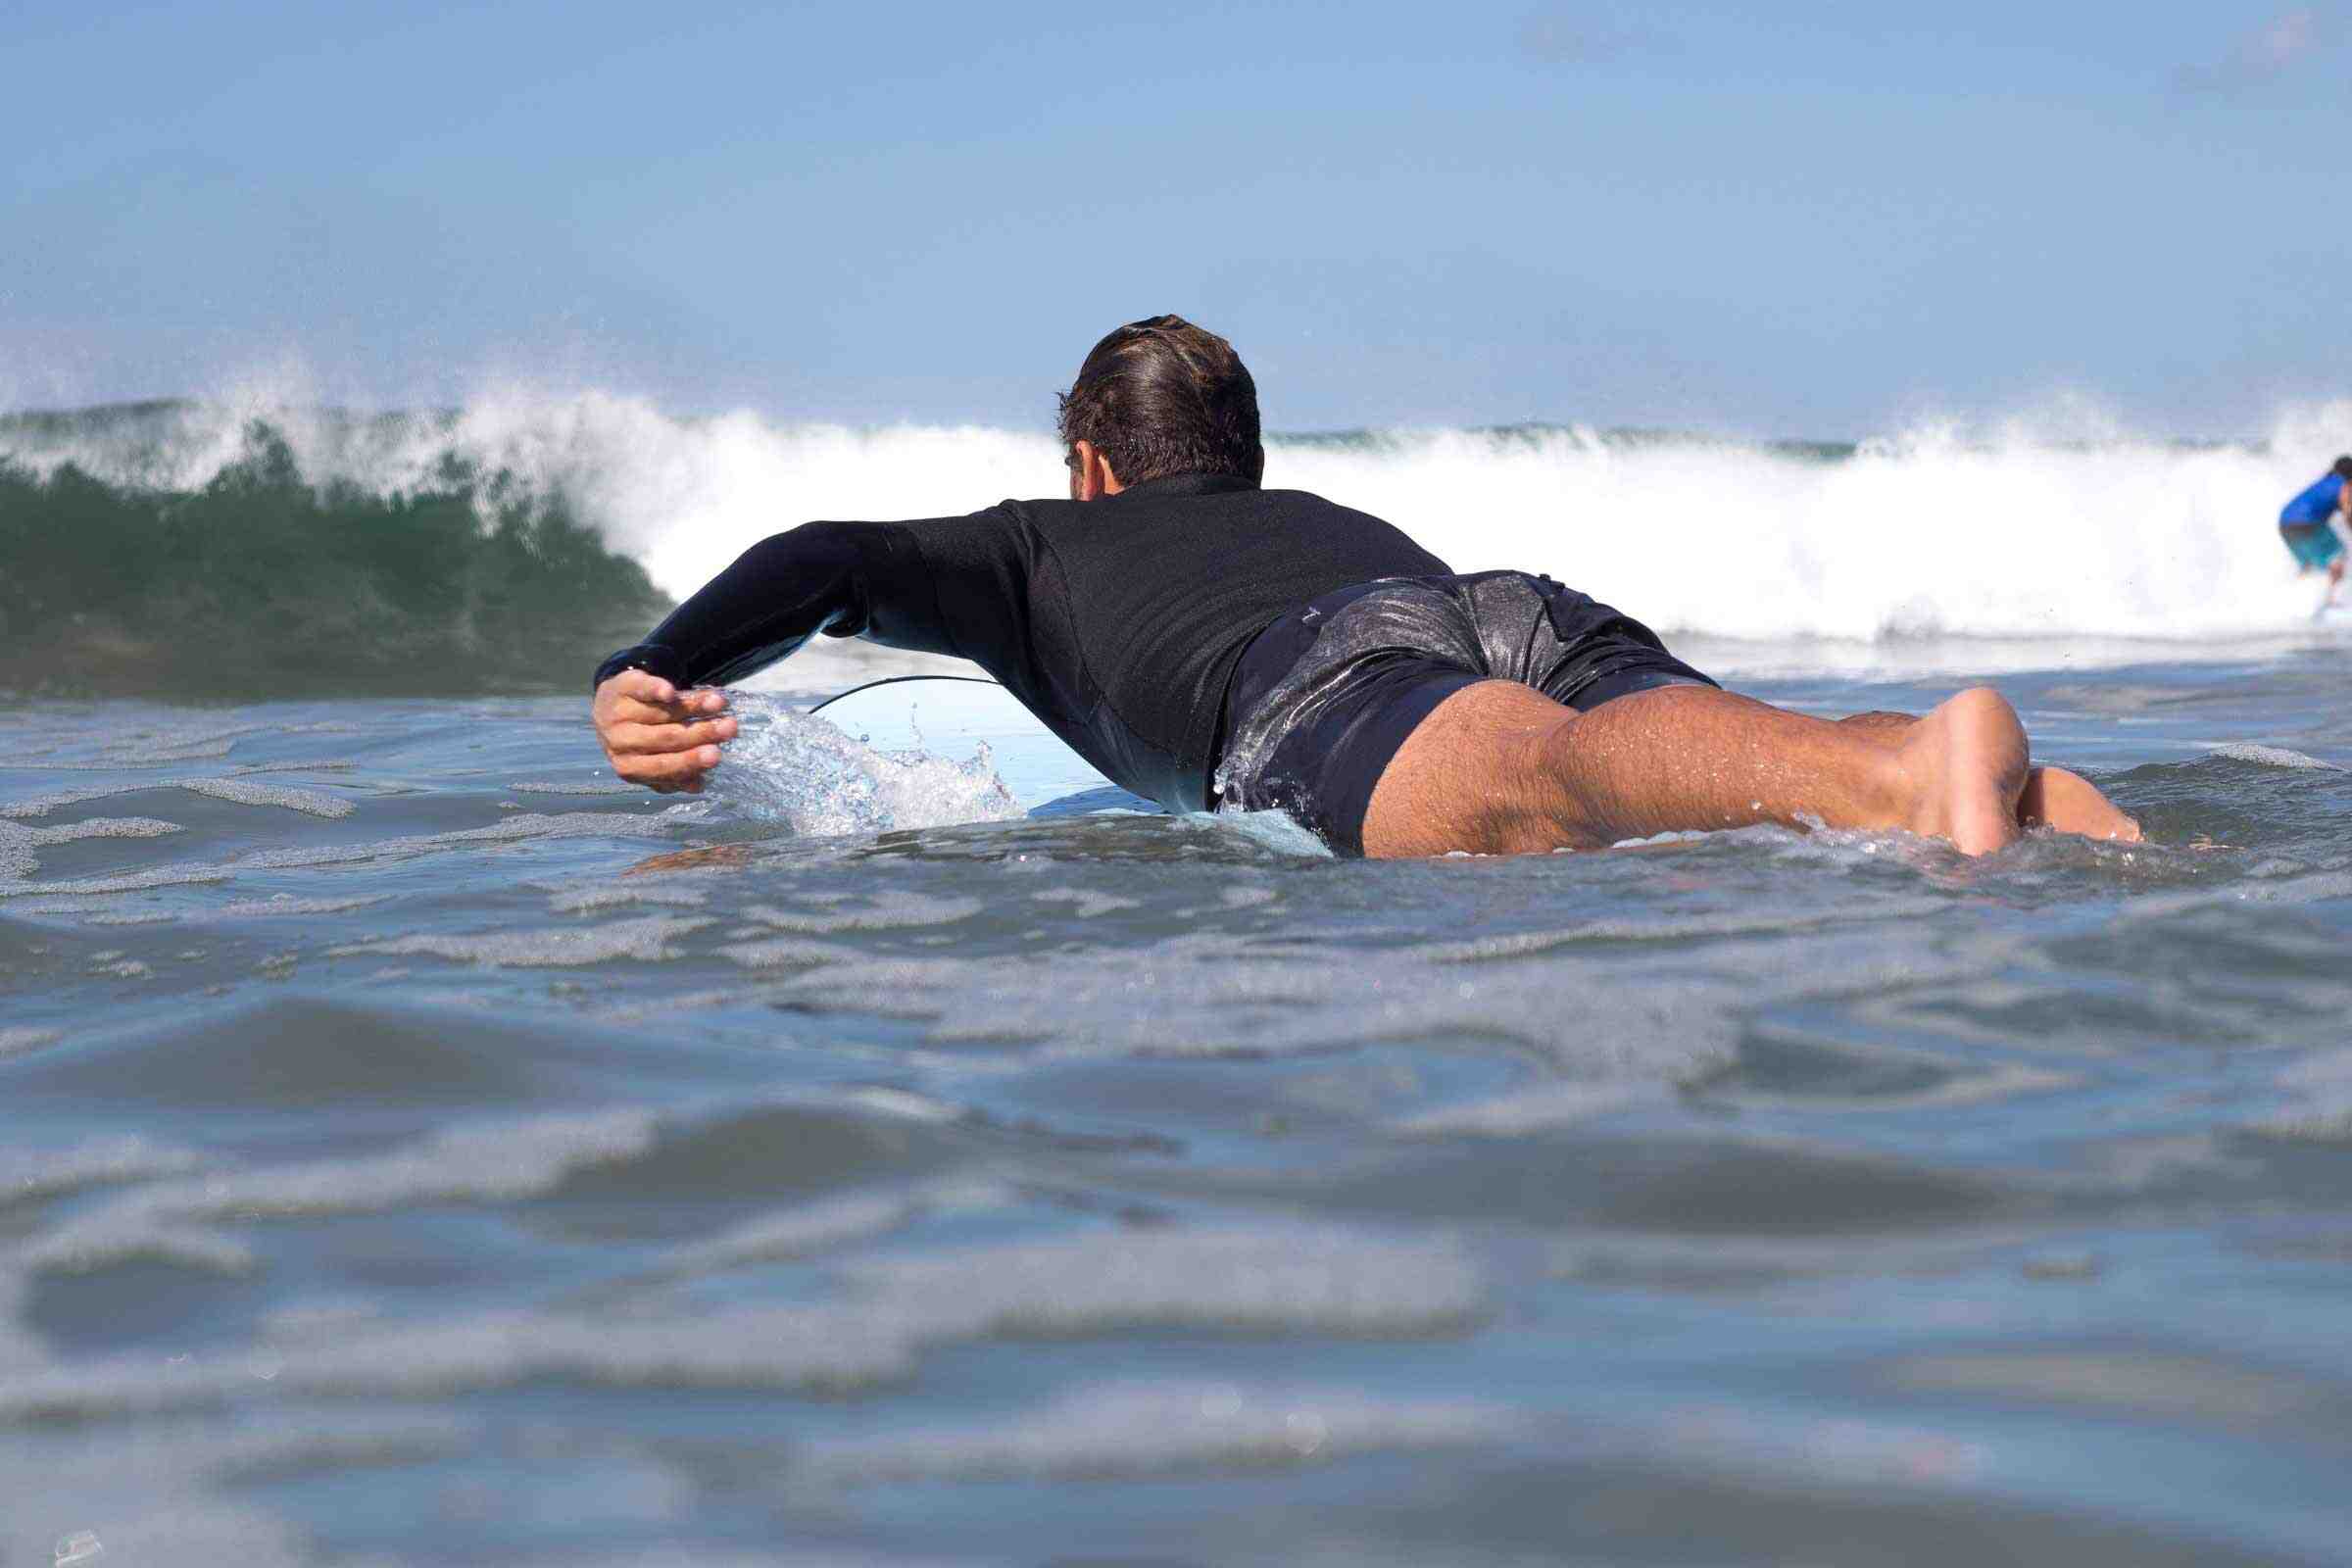 Why do surfers wax their boards?